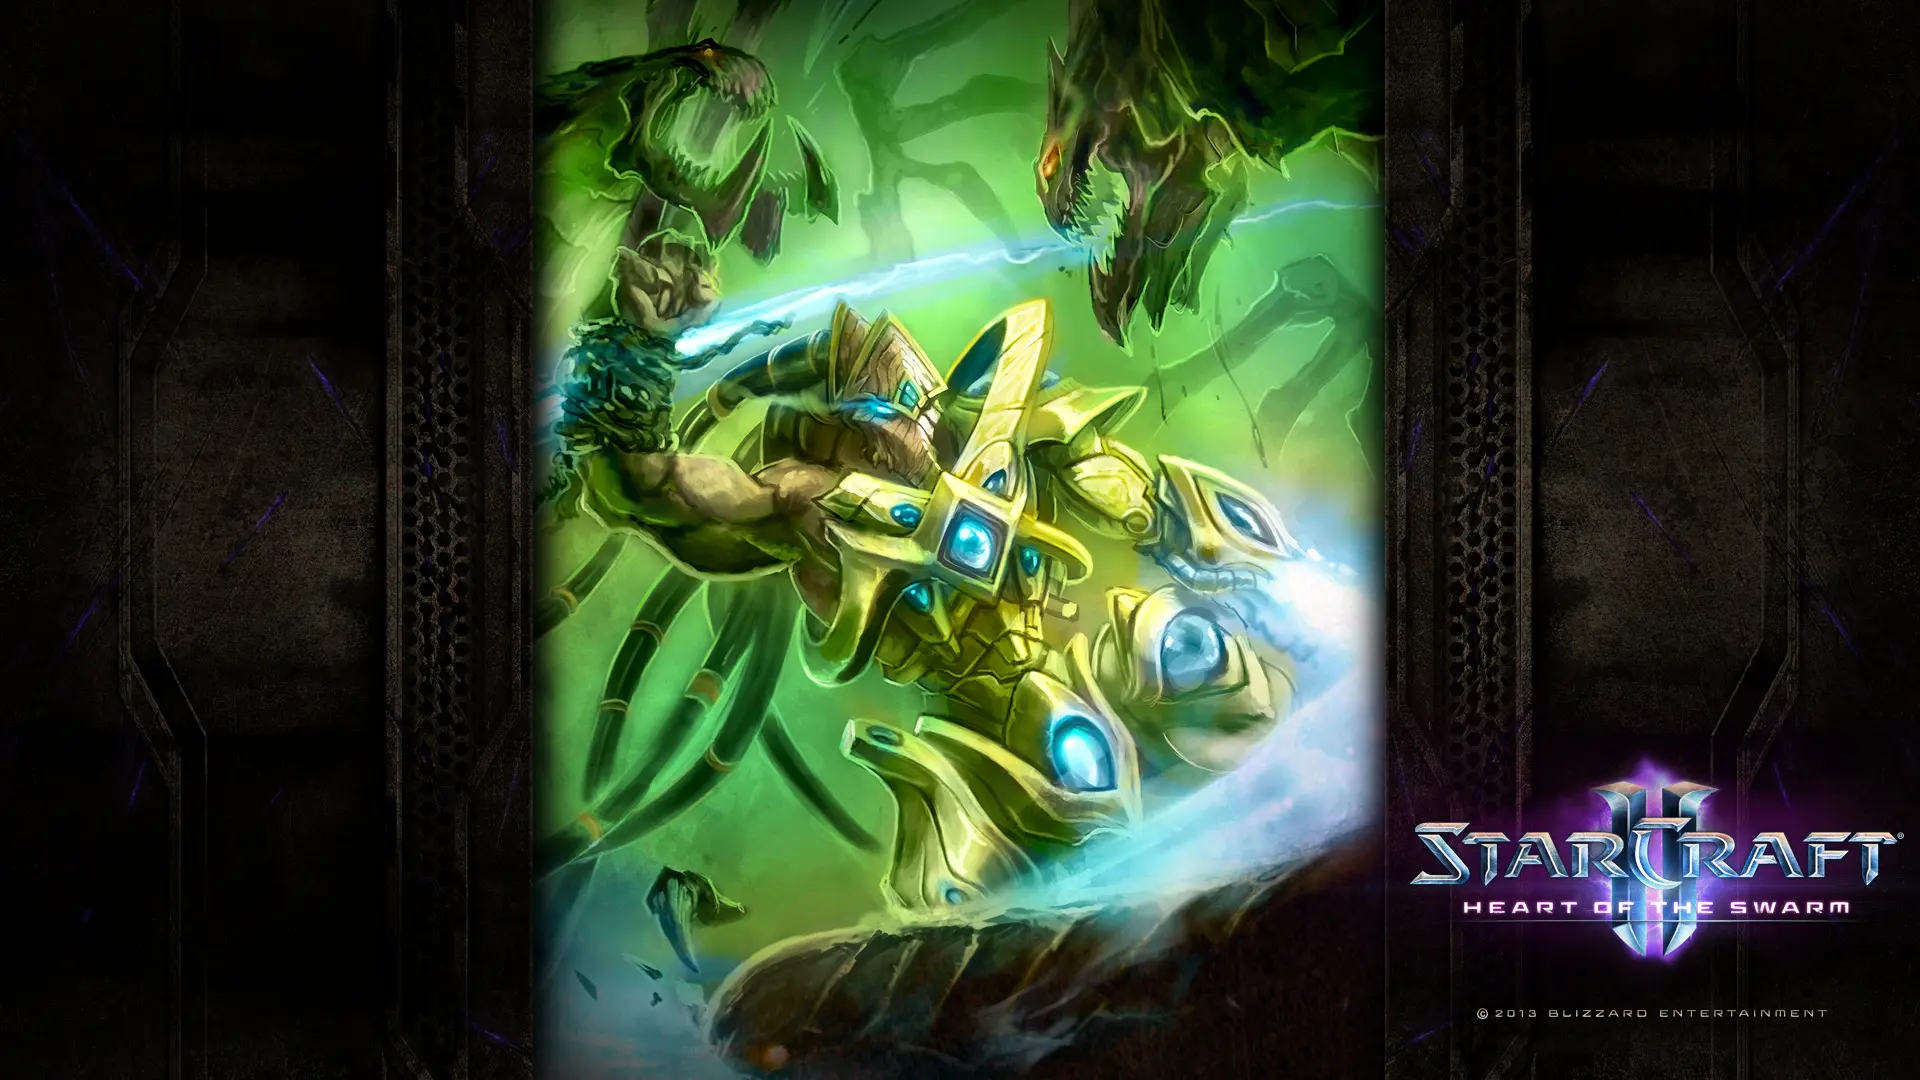 Game Starcraft 2 Heart of the Swarm wallpaper 10 | Background Image